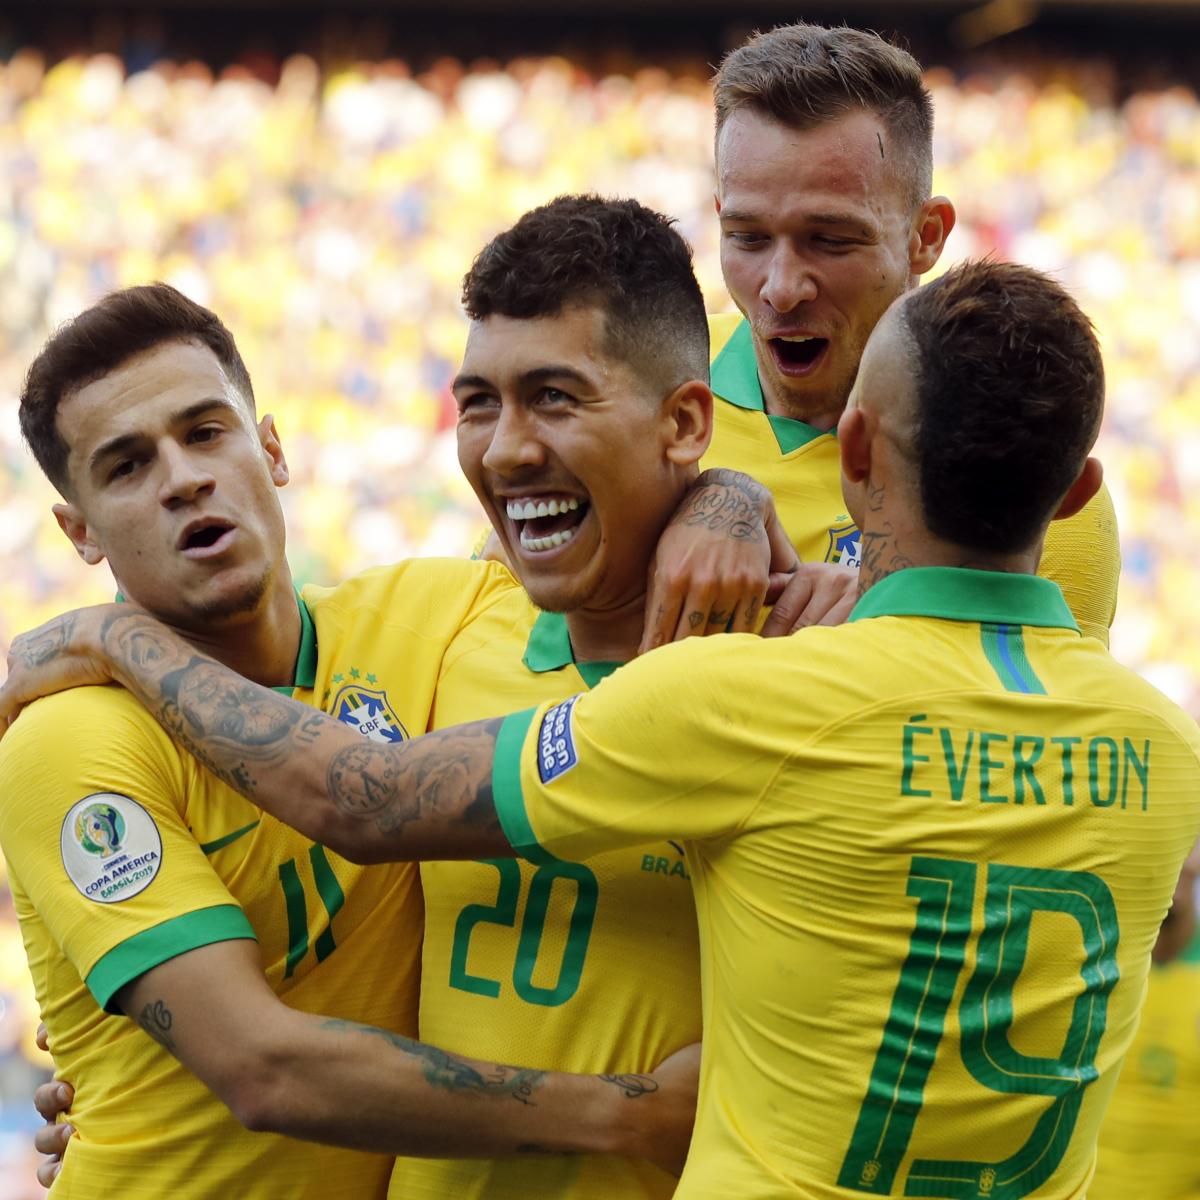 Copa America 2019 Quarterfinals Fixtures Final Group Tables And More Bleacher Report Latest News Videos And Highlights